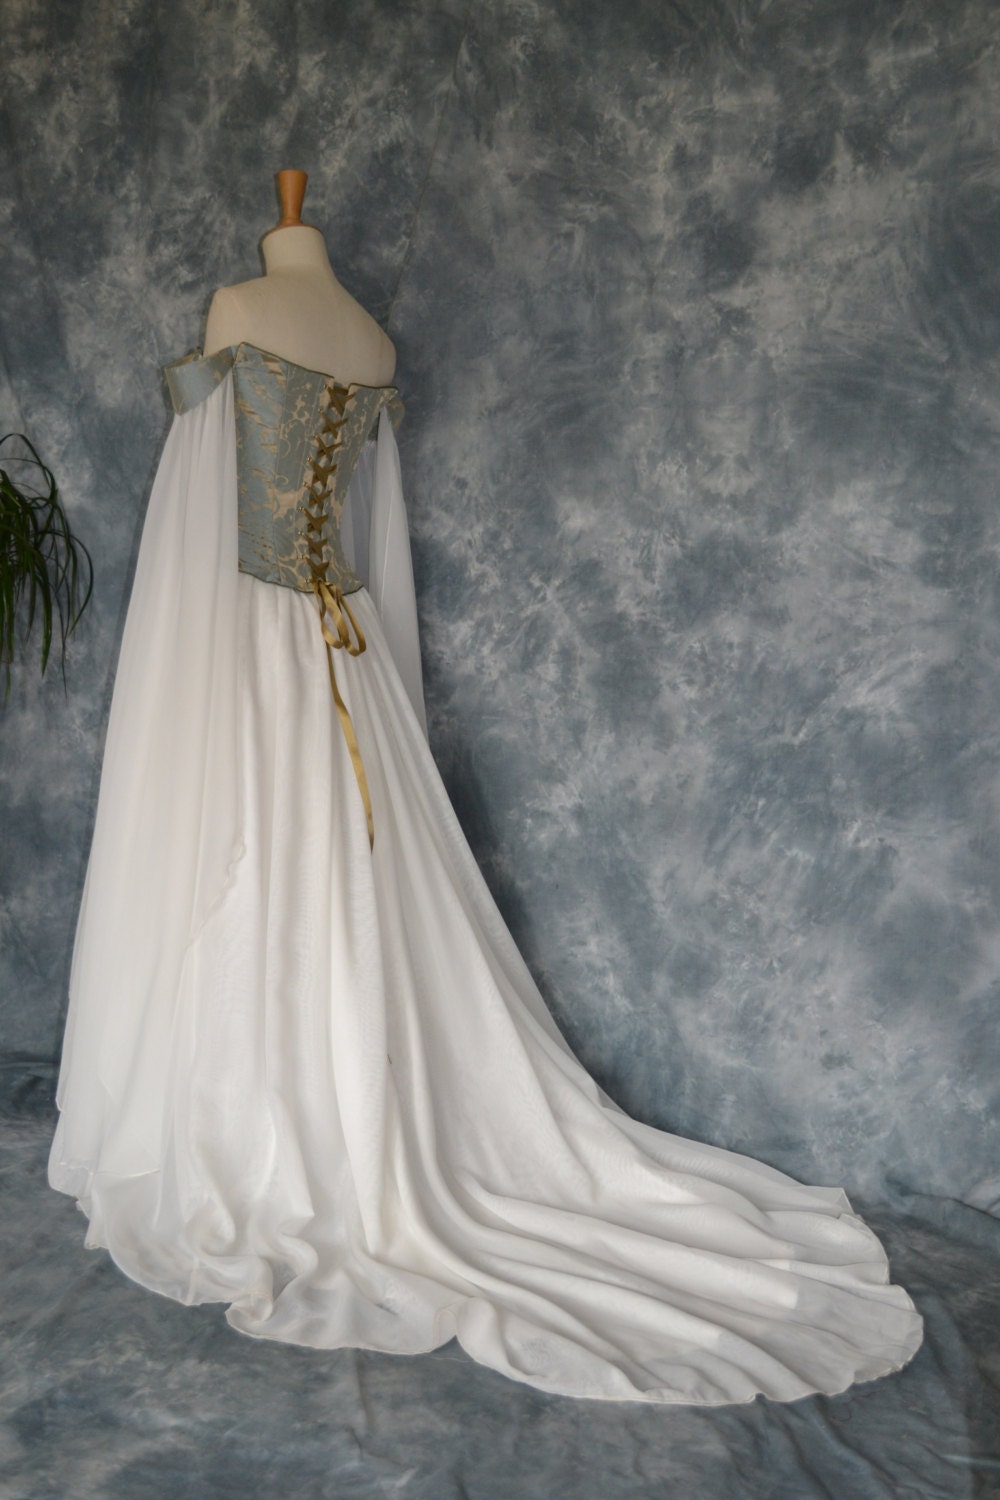 medieval wedding gown